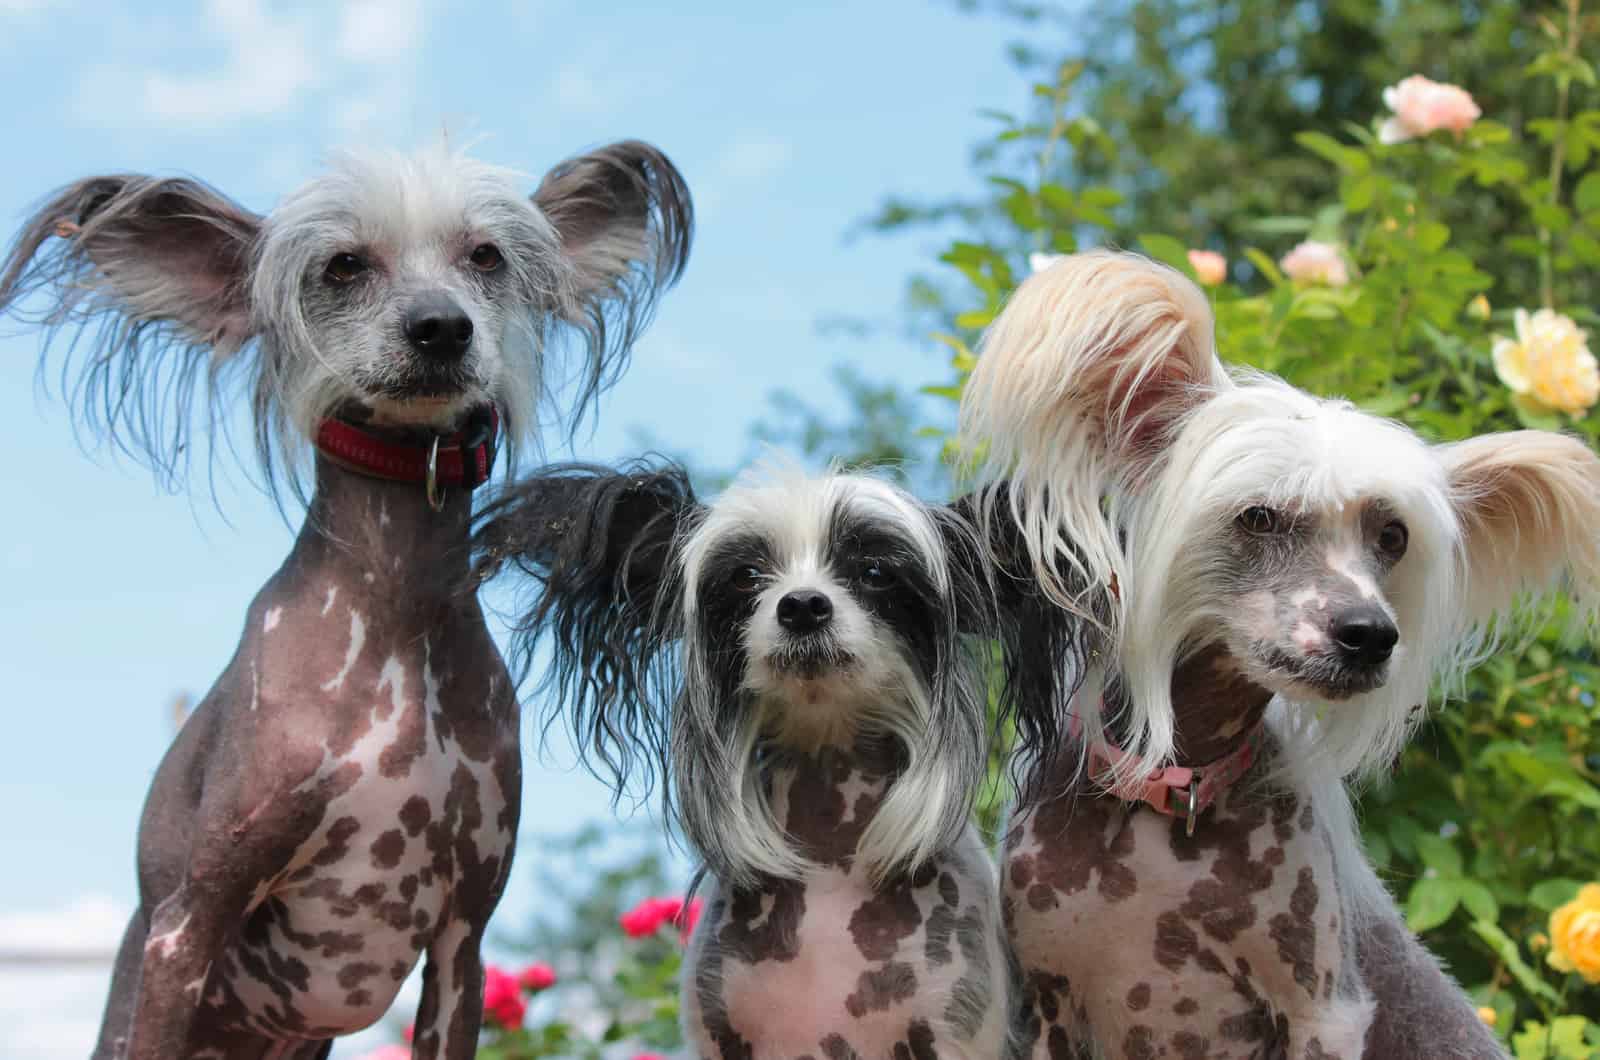 three Chinese crested dogs hairless in the garden